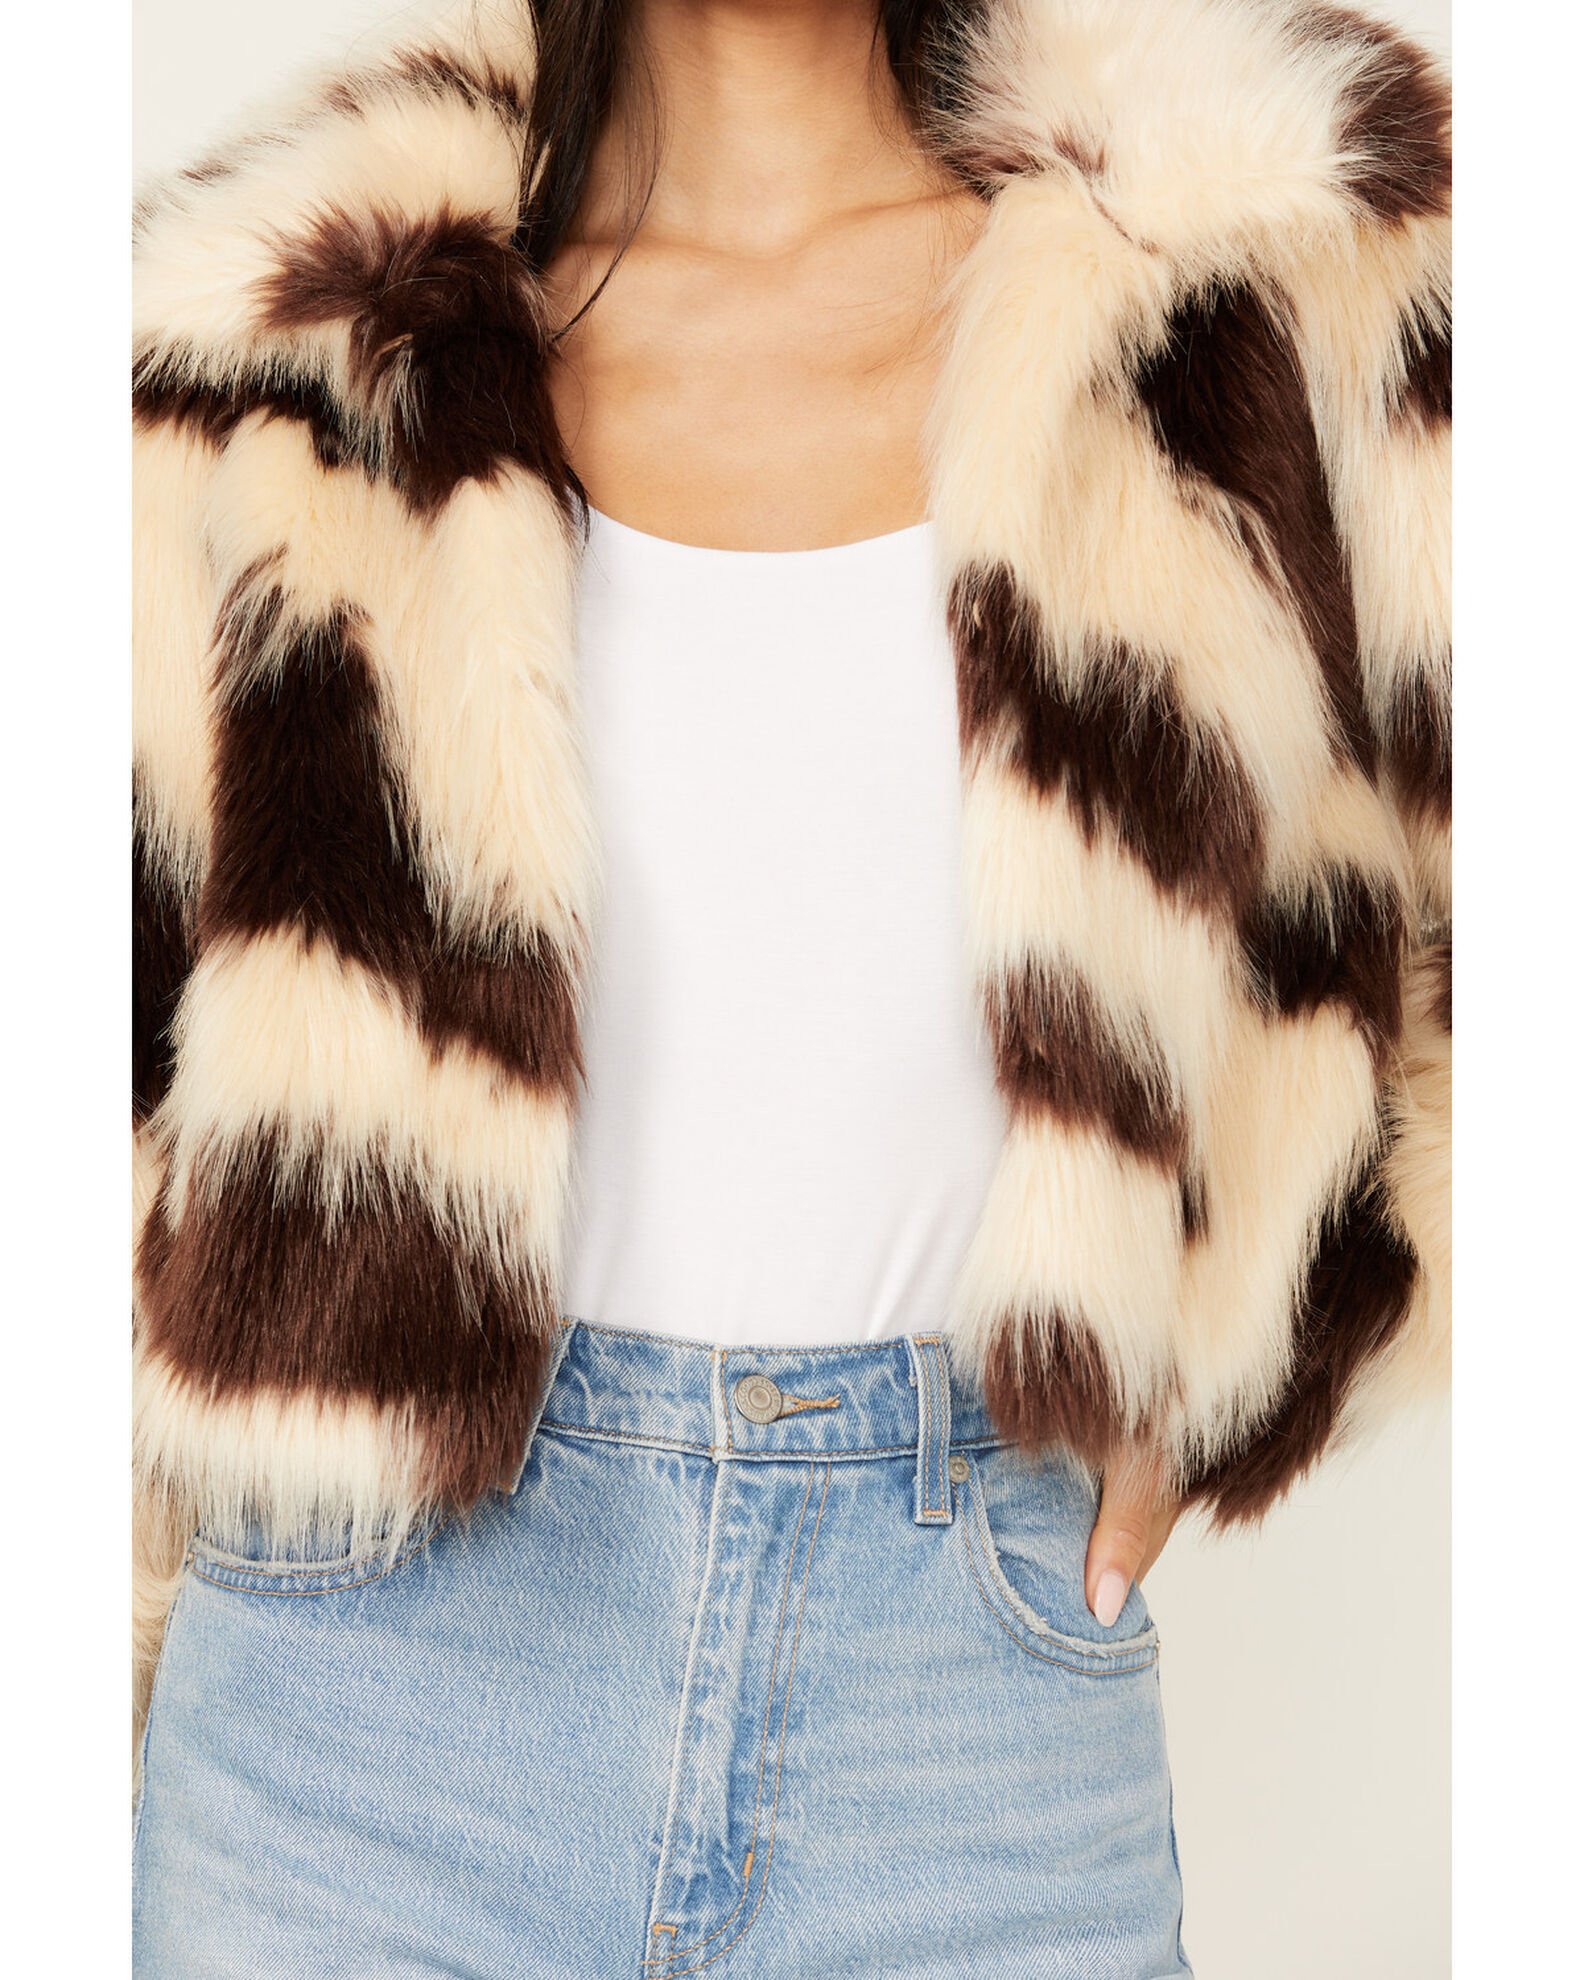 Band of the Free Women's Agnes Faux Fur Jacket